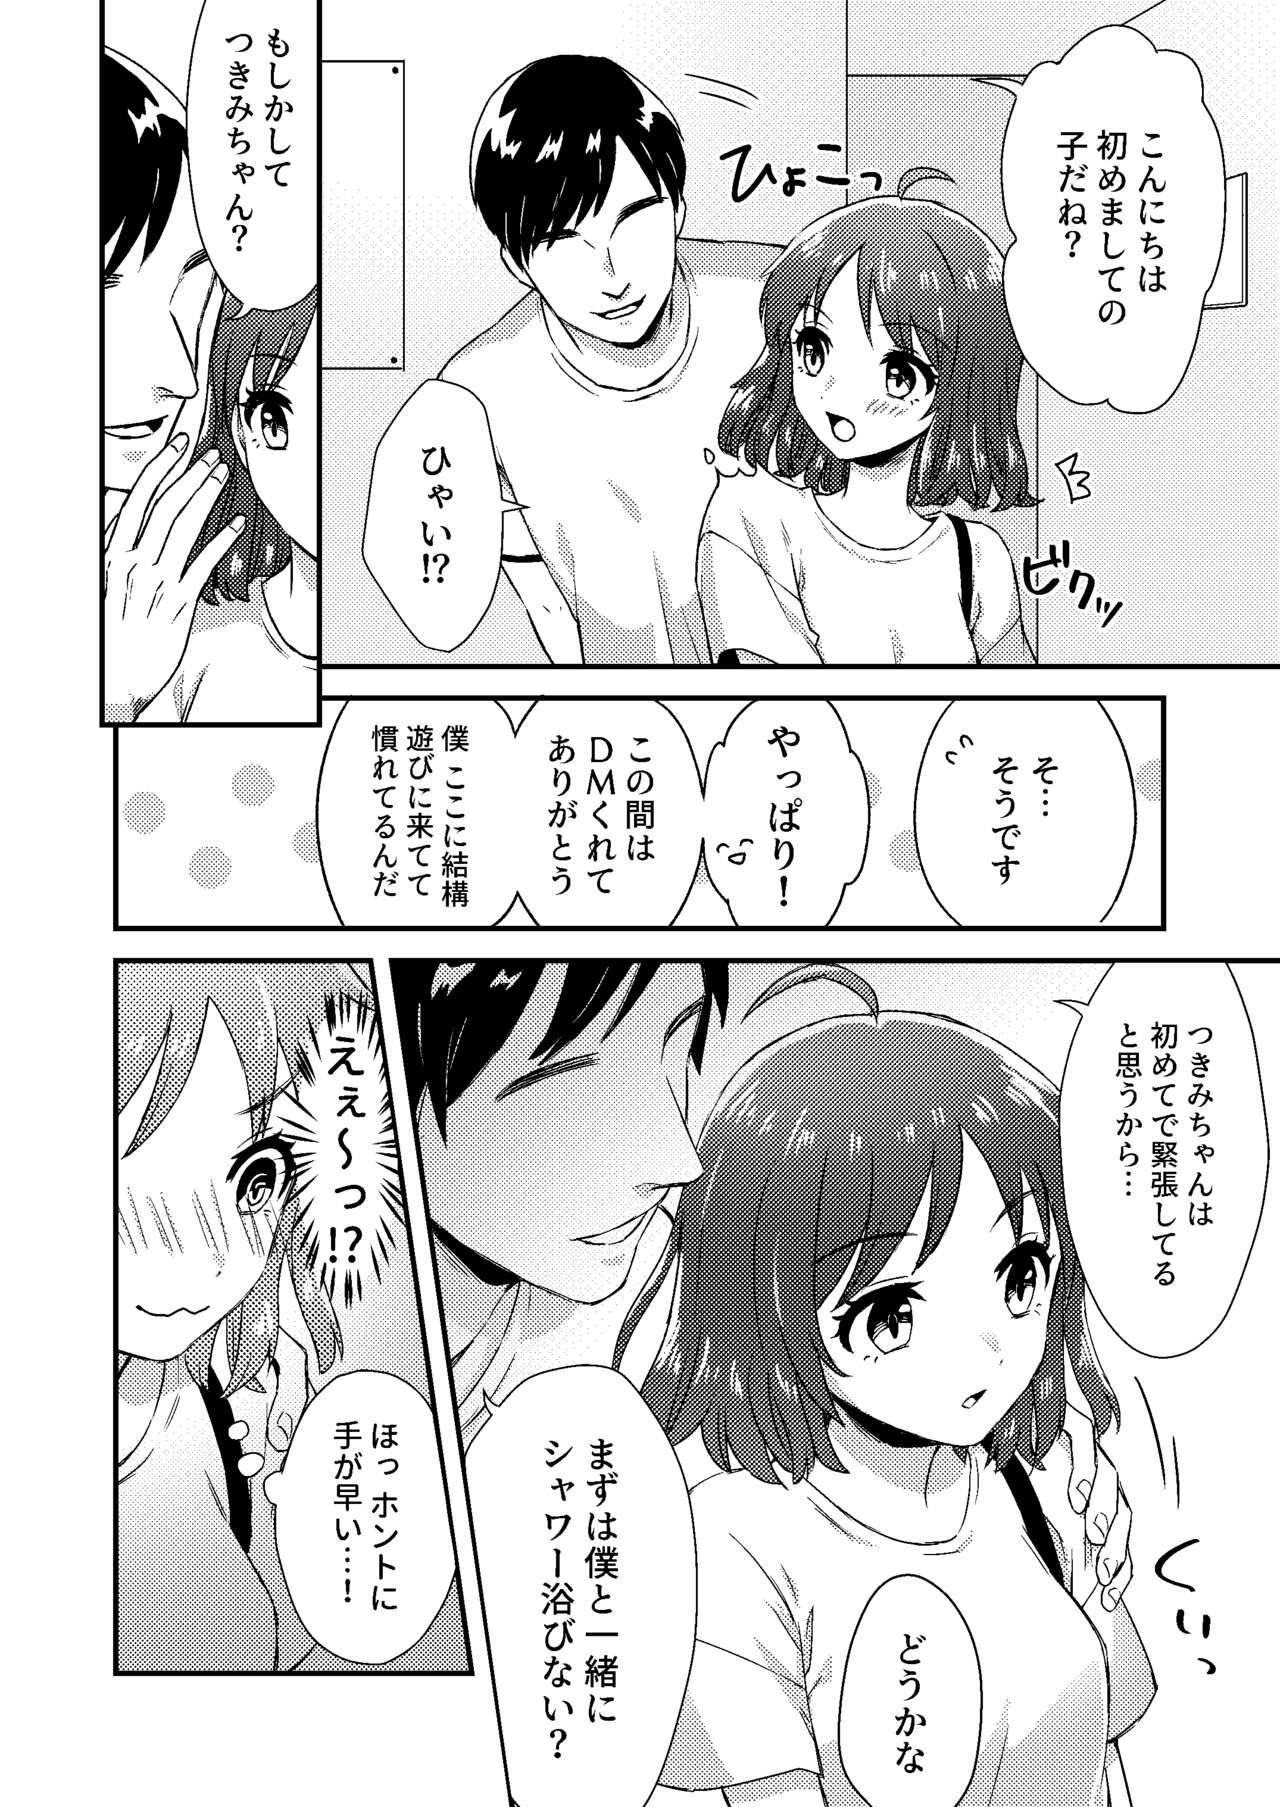 Fishnet にぷばー #1 つきみちゃんの場合 Topless - Page 10